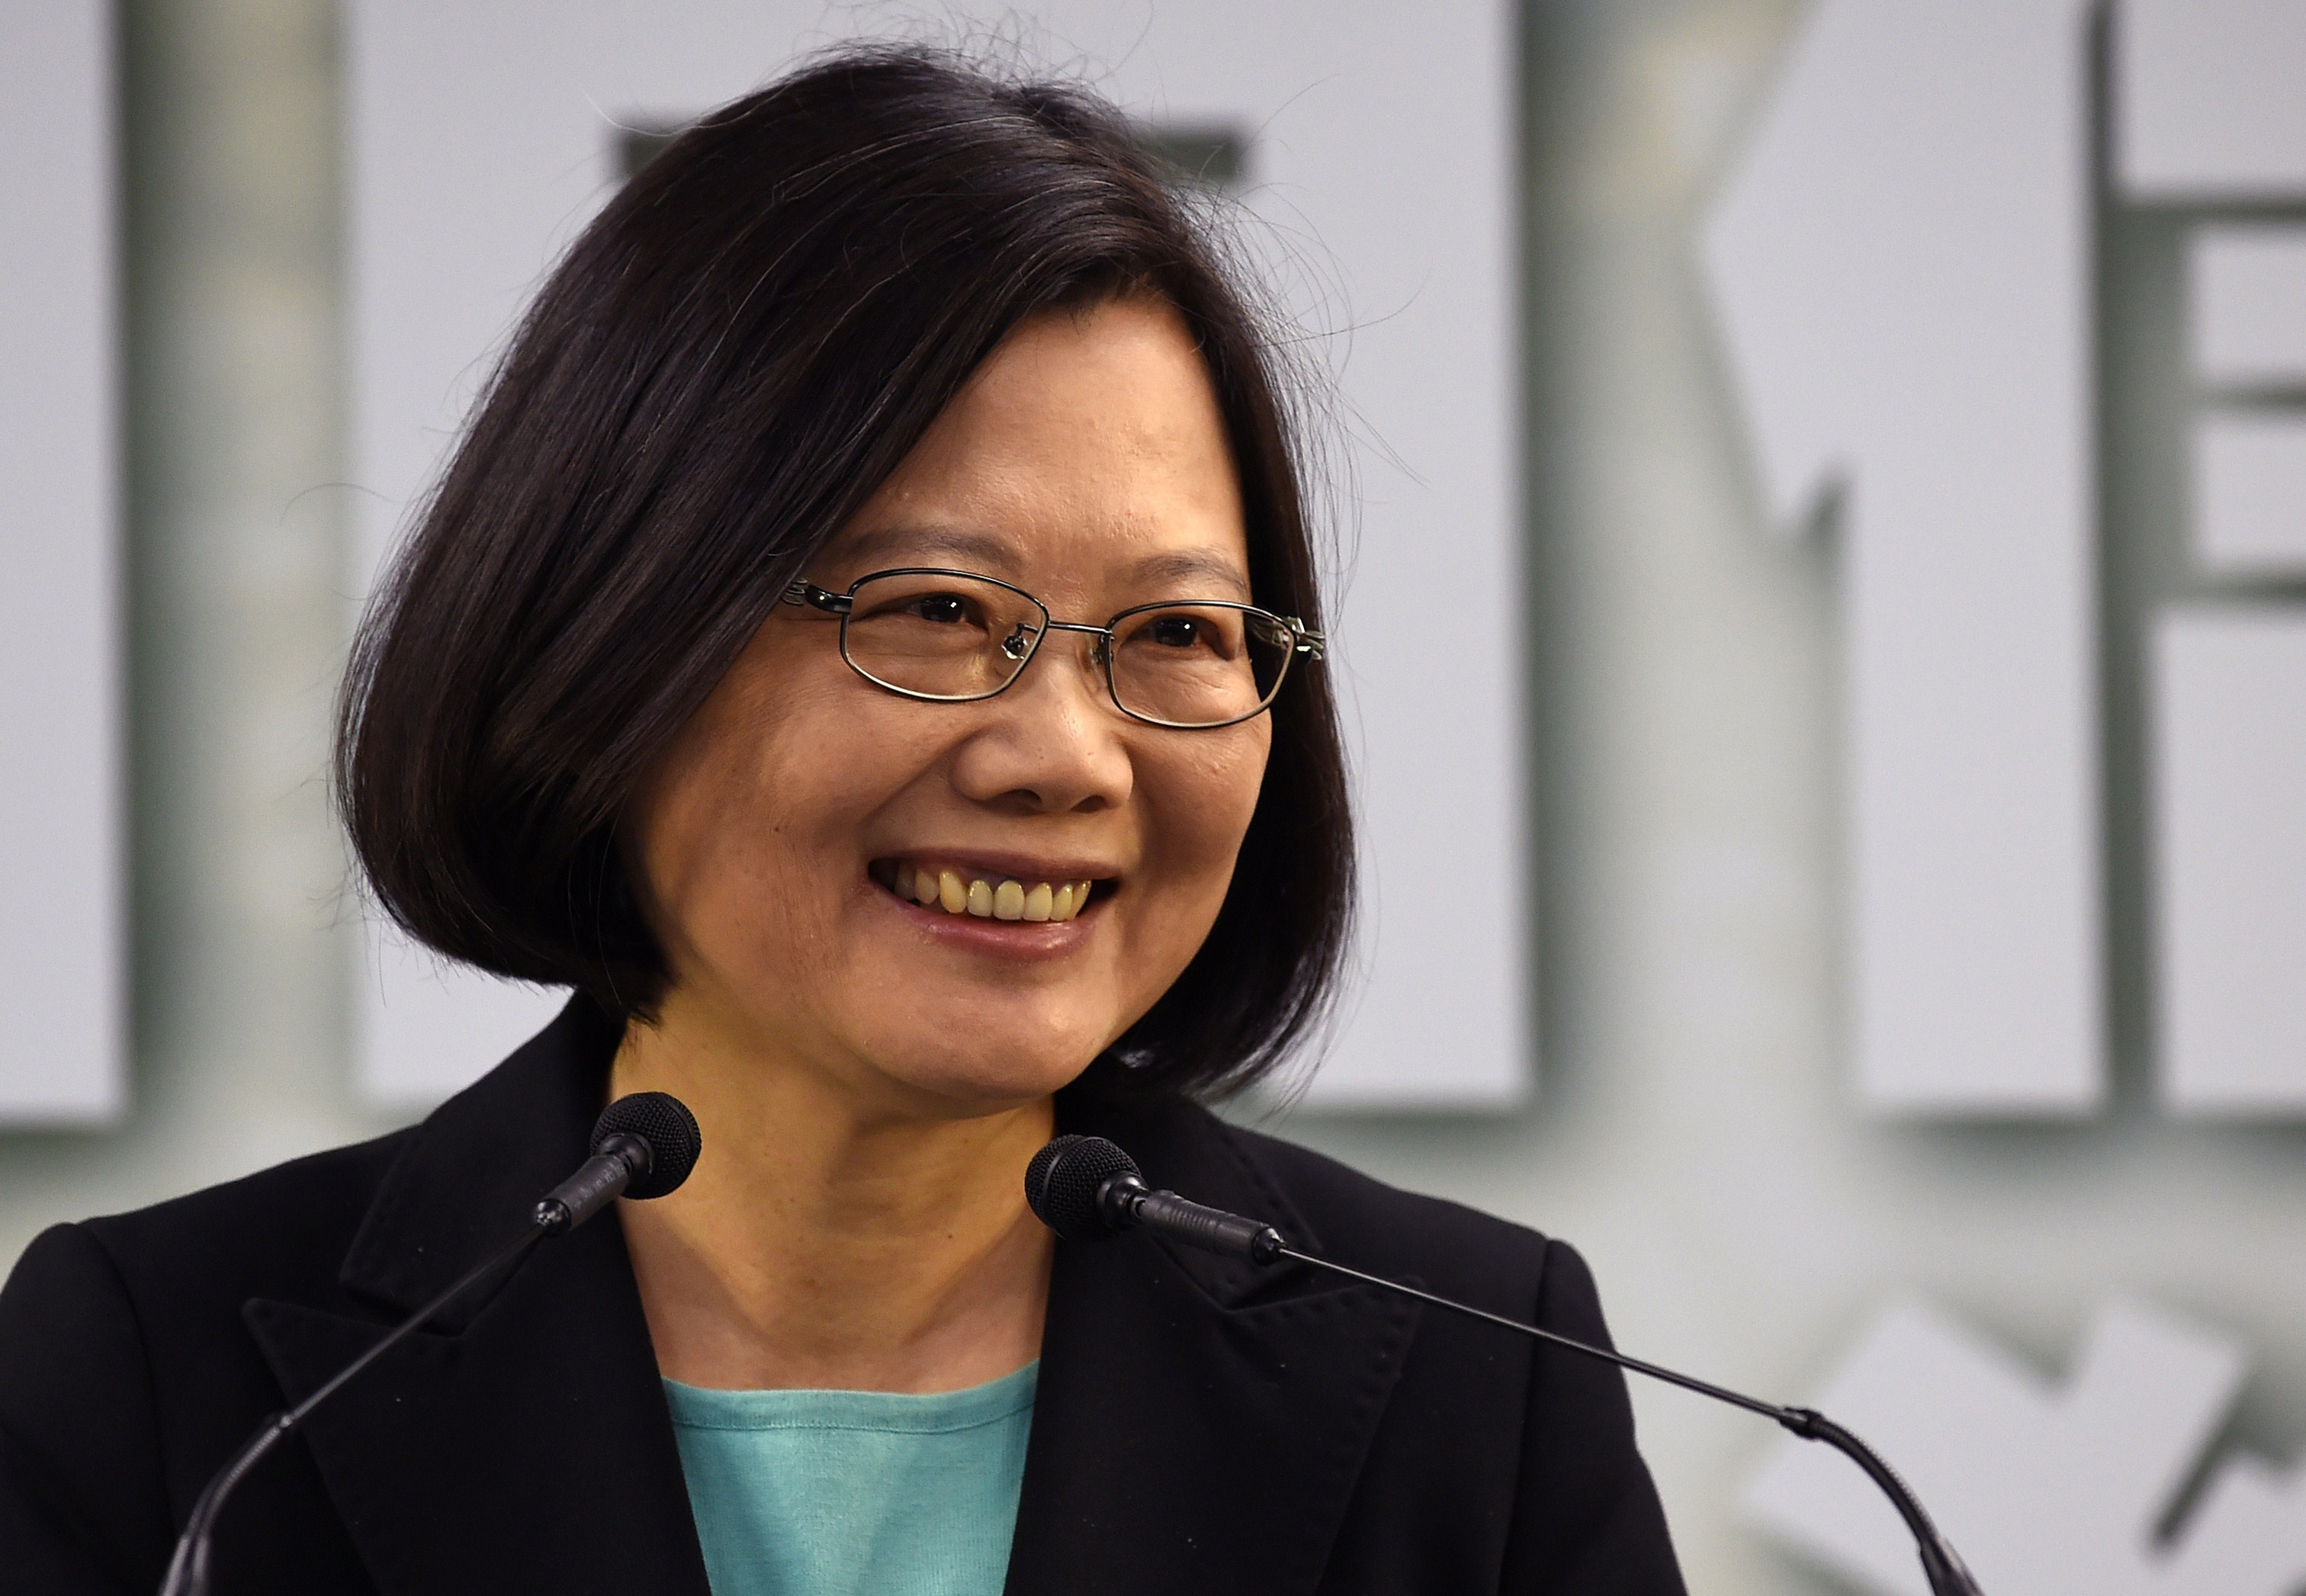 Tsai Ing-wen, chairwoman of Taiwan's main opposition Democratic Progressive Party (DPP), smiles during a press conference in Taipei on April 15, 2015. The DPP announced on April 15 that Tsai will run for president in 2016 in the hope of becoming the island's first ever woman leader. (SAM YEH—AFP/Getty Images)